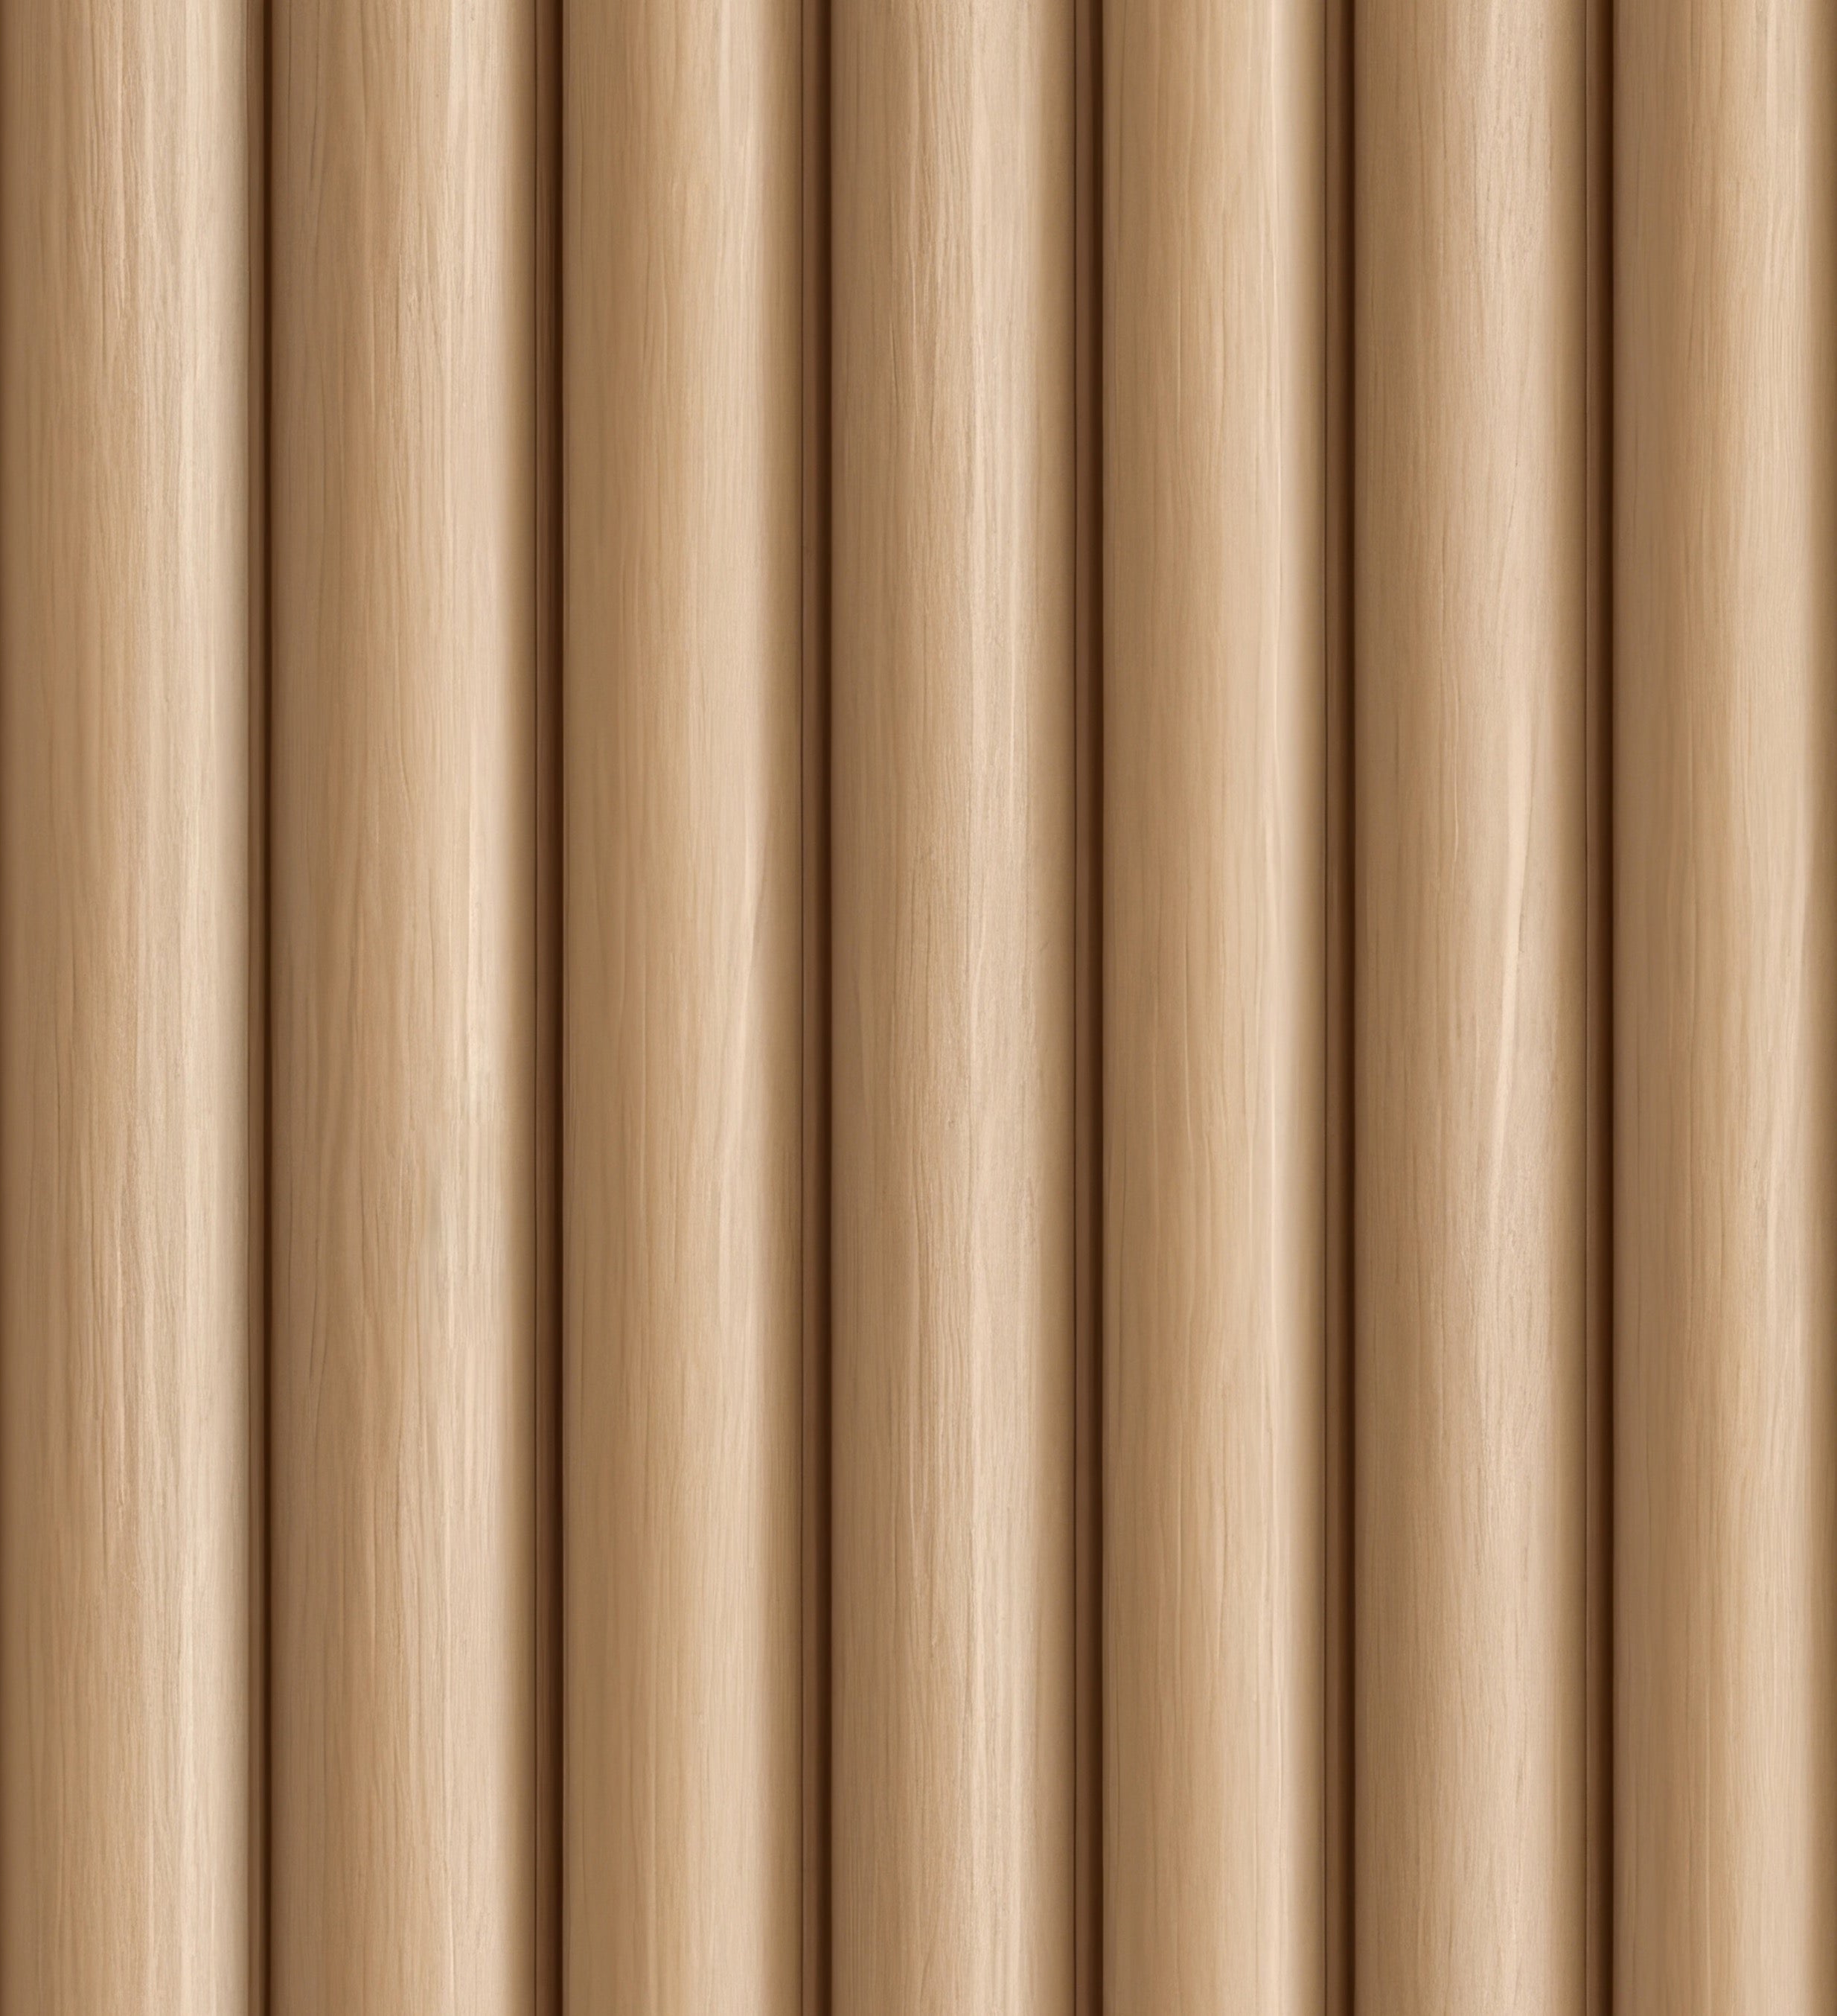 A close-up view of Wooden Pillar Wallpaper displaying vertical grooves in a warm wood tone. The textured design adds a refined and contemporary touch to any room.